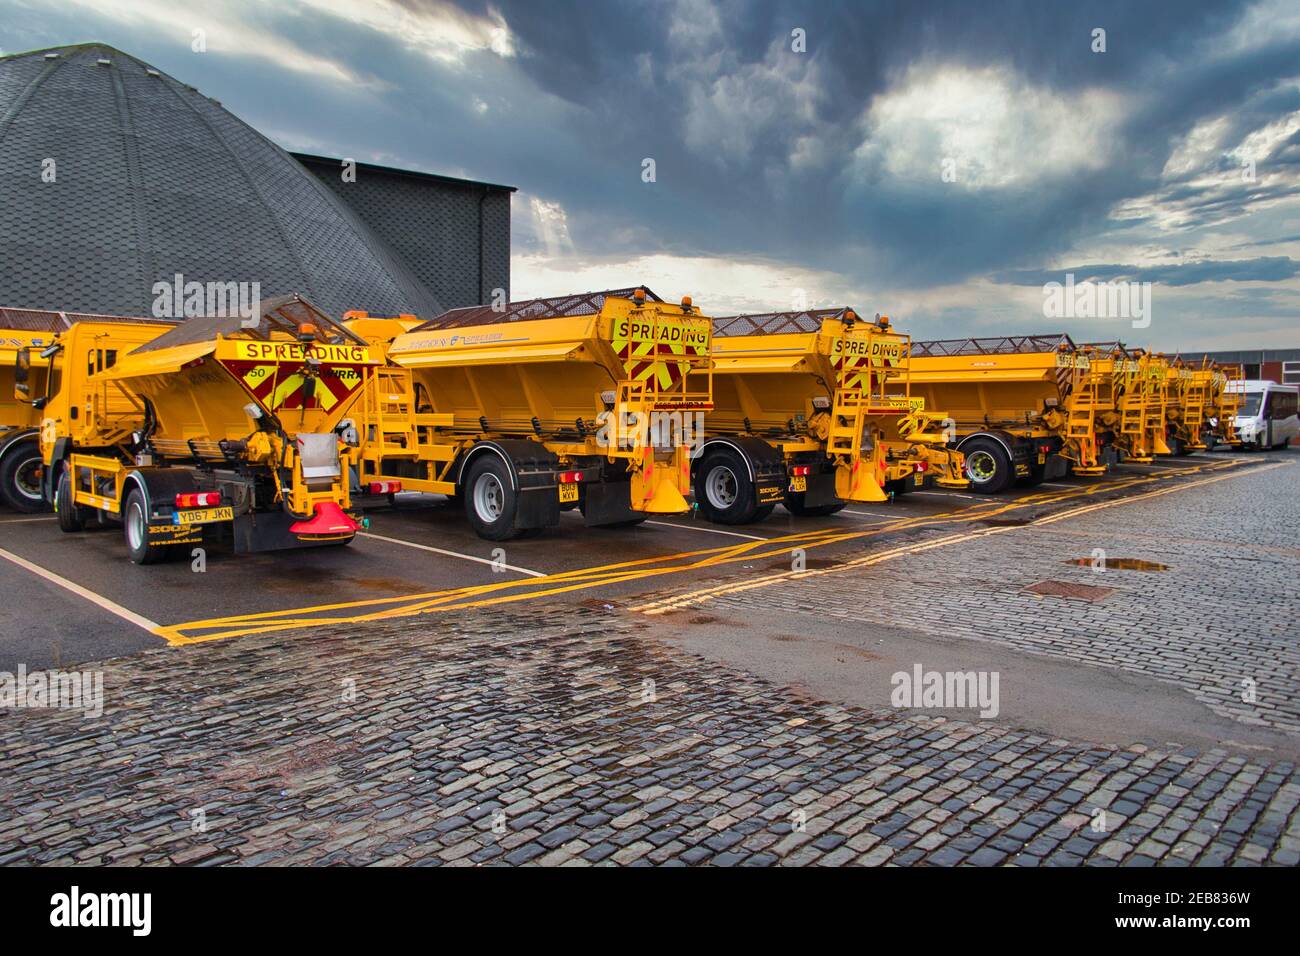 Road gritting equipment in Birkenhead, Wirral, UK. The Wirral Salt Dome is shown on the left - this is where the Council's rock salt supply is stored. Stock Photo